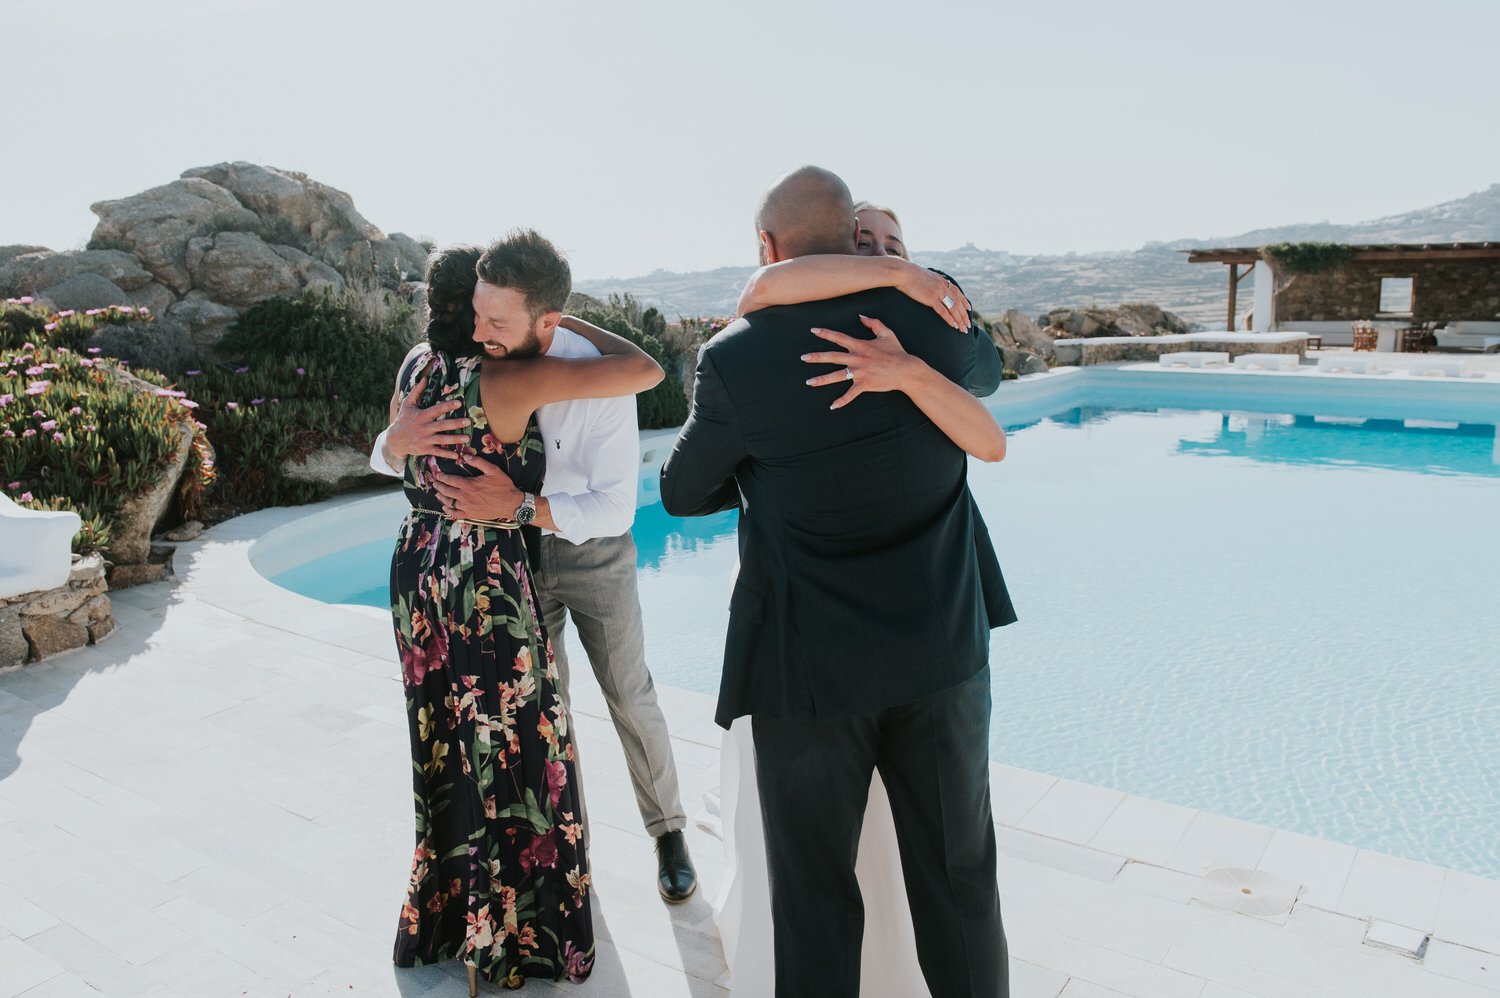 Mykonos wedding photographer: bride and groom hugging their friends next to the pool in afternoon light.